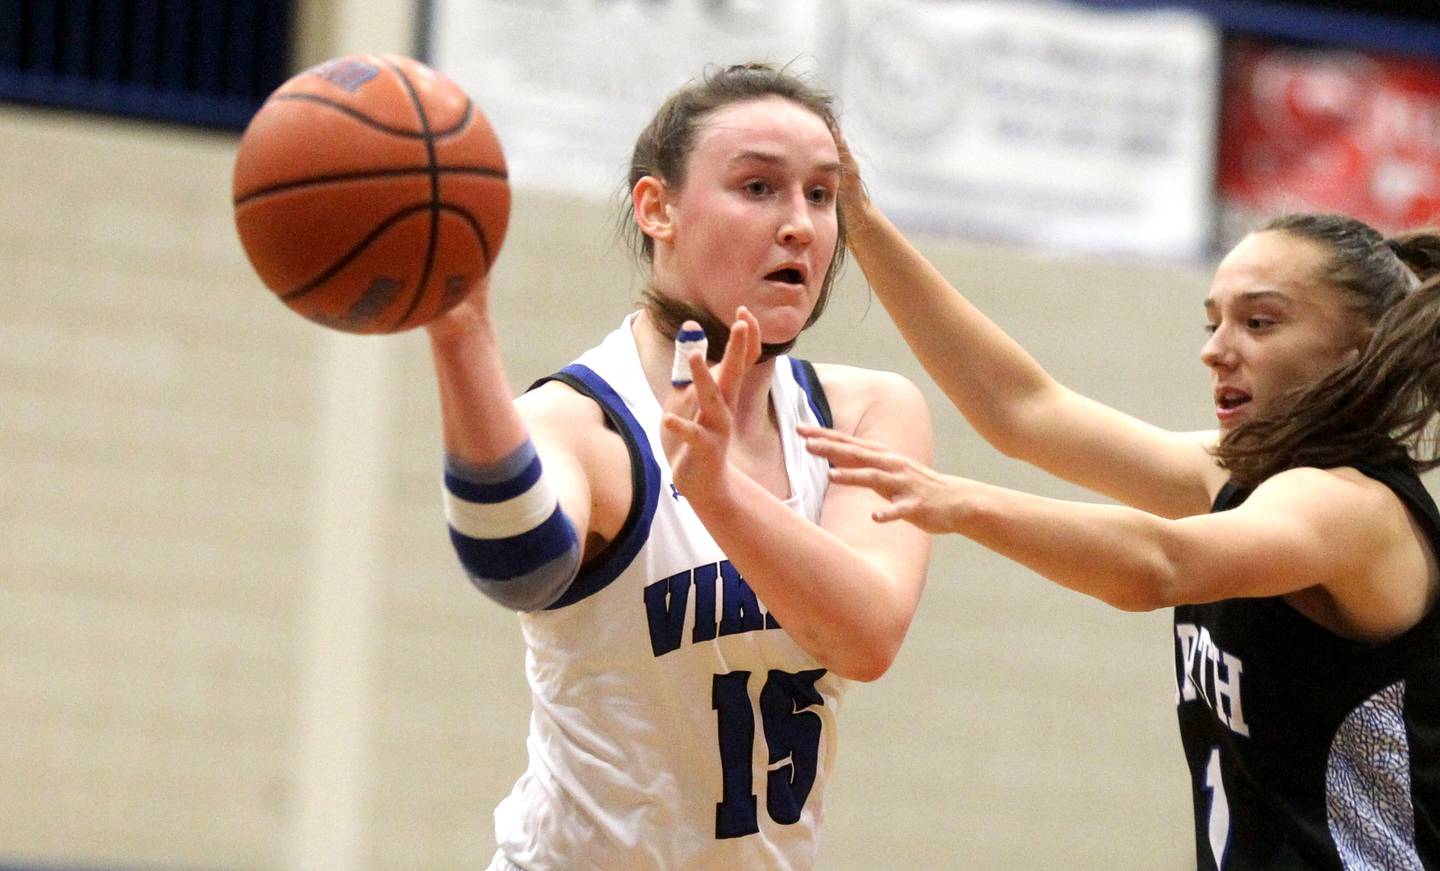 Geneva’s Cassidy Arni passes the ball during a game against St. Charles North at Geneva on Friday, Dec. 9, 2022.